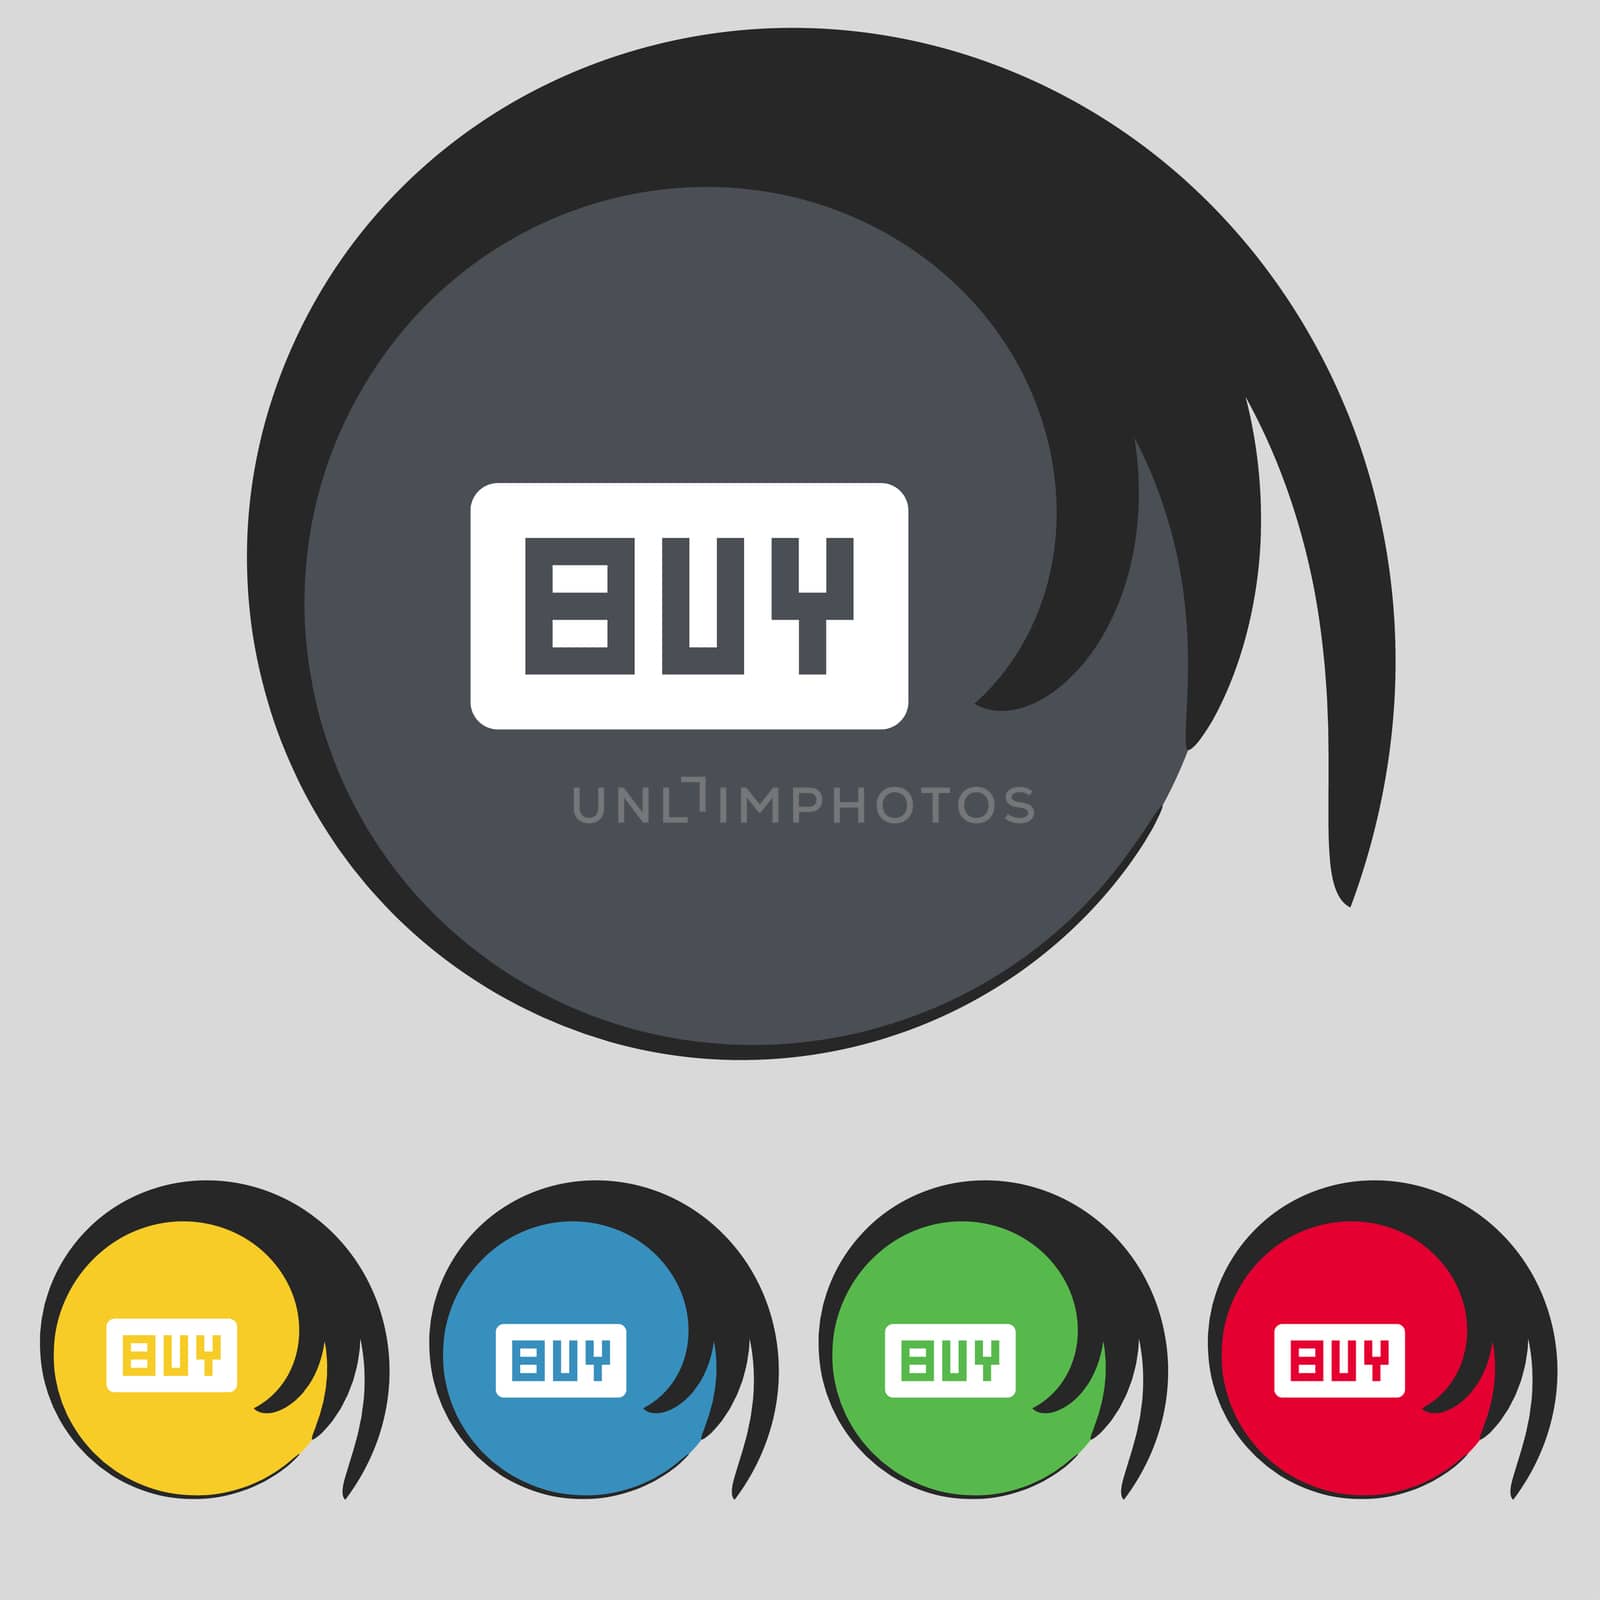 Buy, Online buying dollar usd icon sign. Symbol on five colored buttons.  by serhii_lohvyniuk